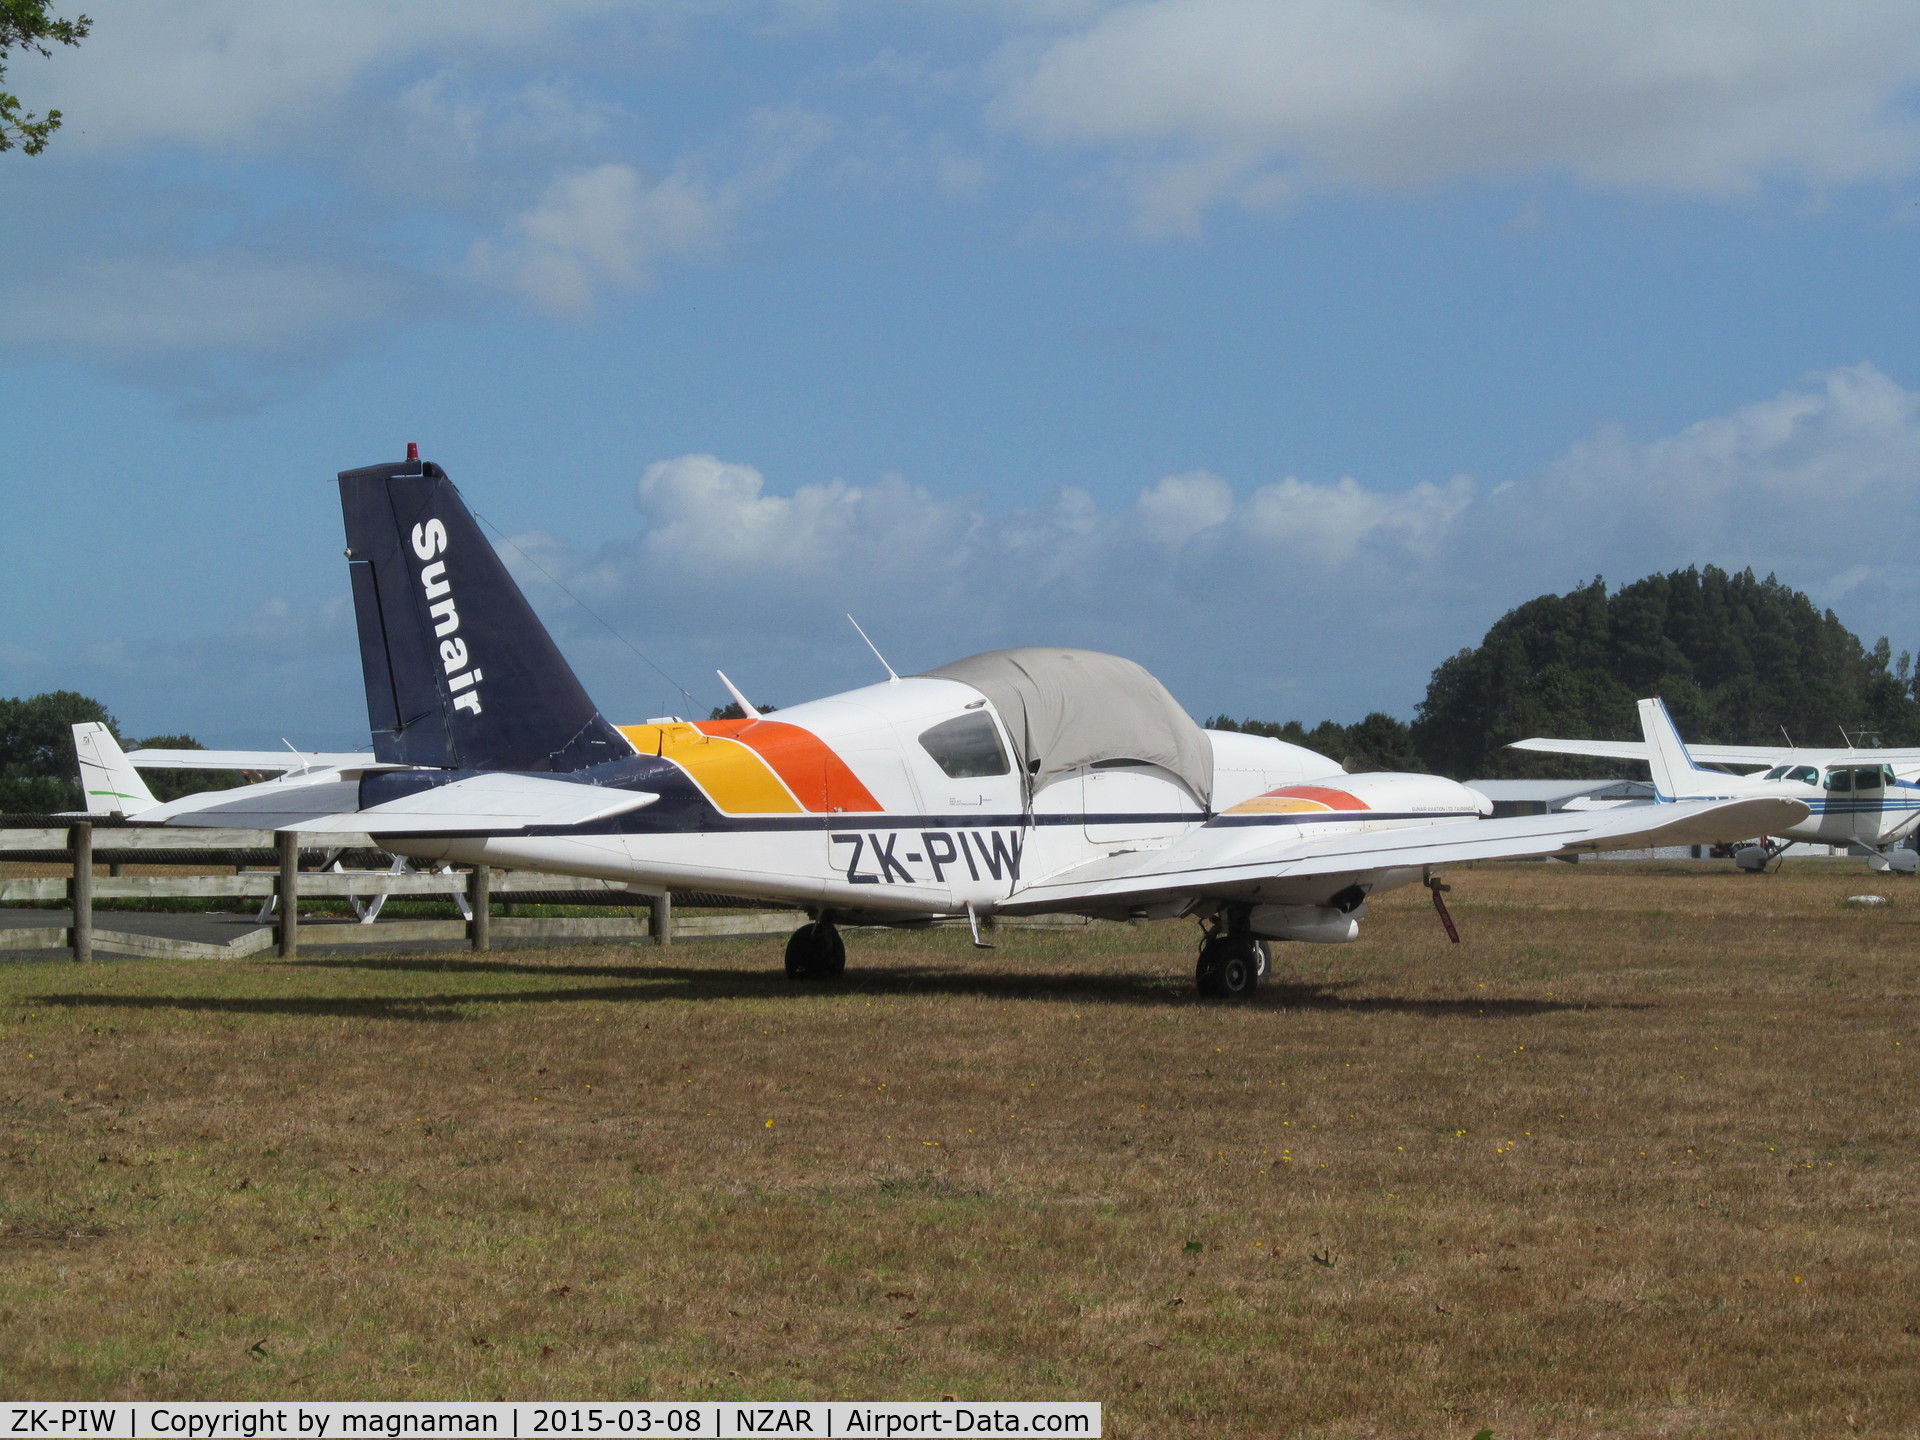 ZK-PIW, Piper PA-23-250 Aztec C/N 27-7305089, yet another sunair at Ardmore.